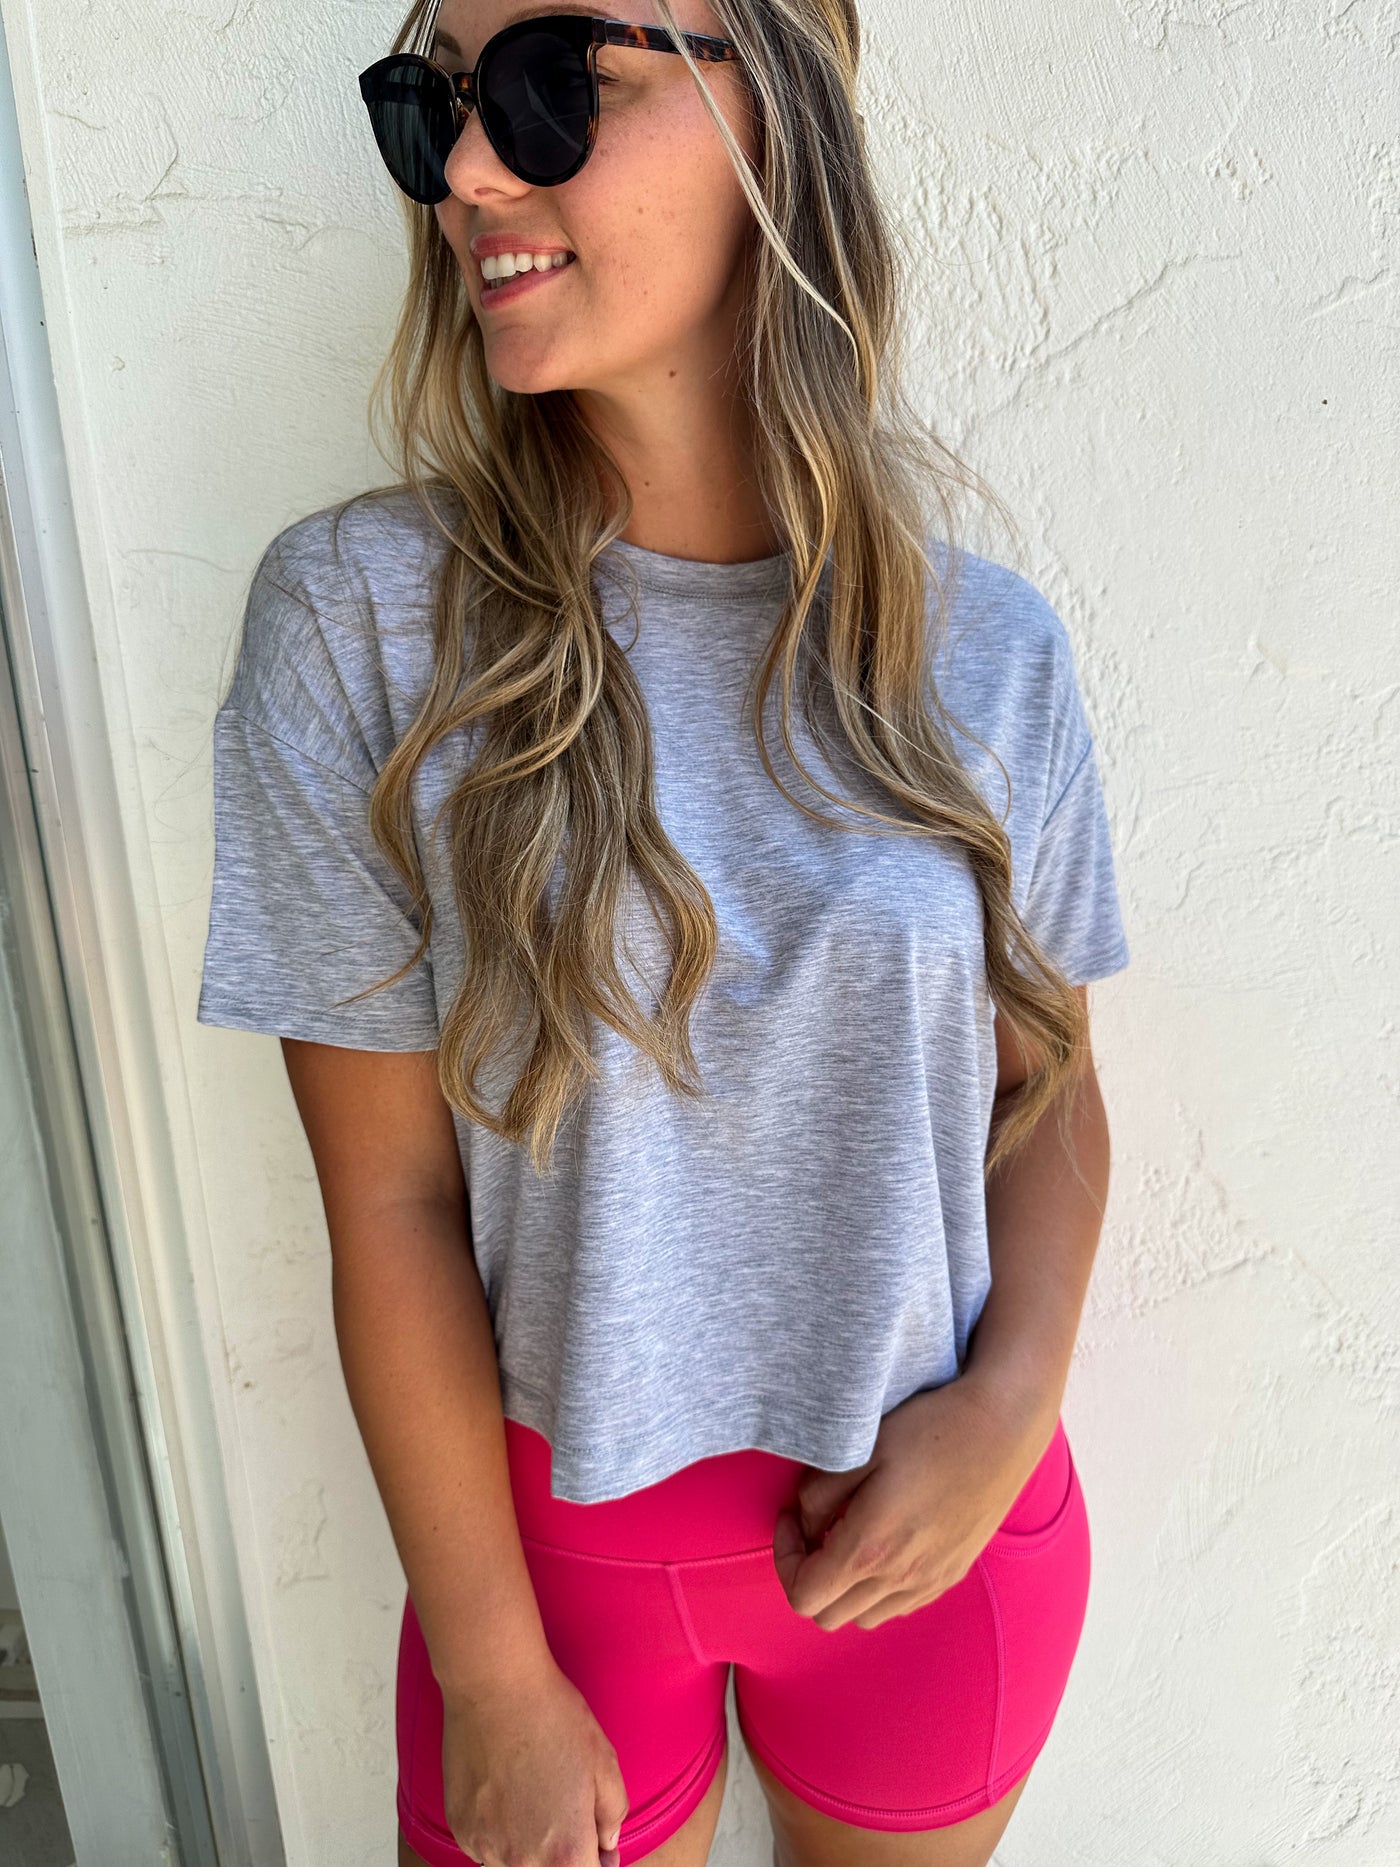 The Basic Gray Top